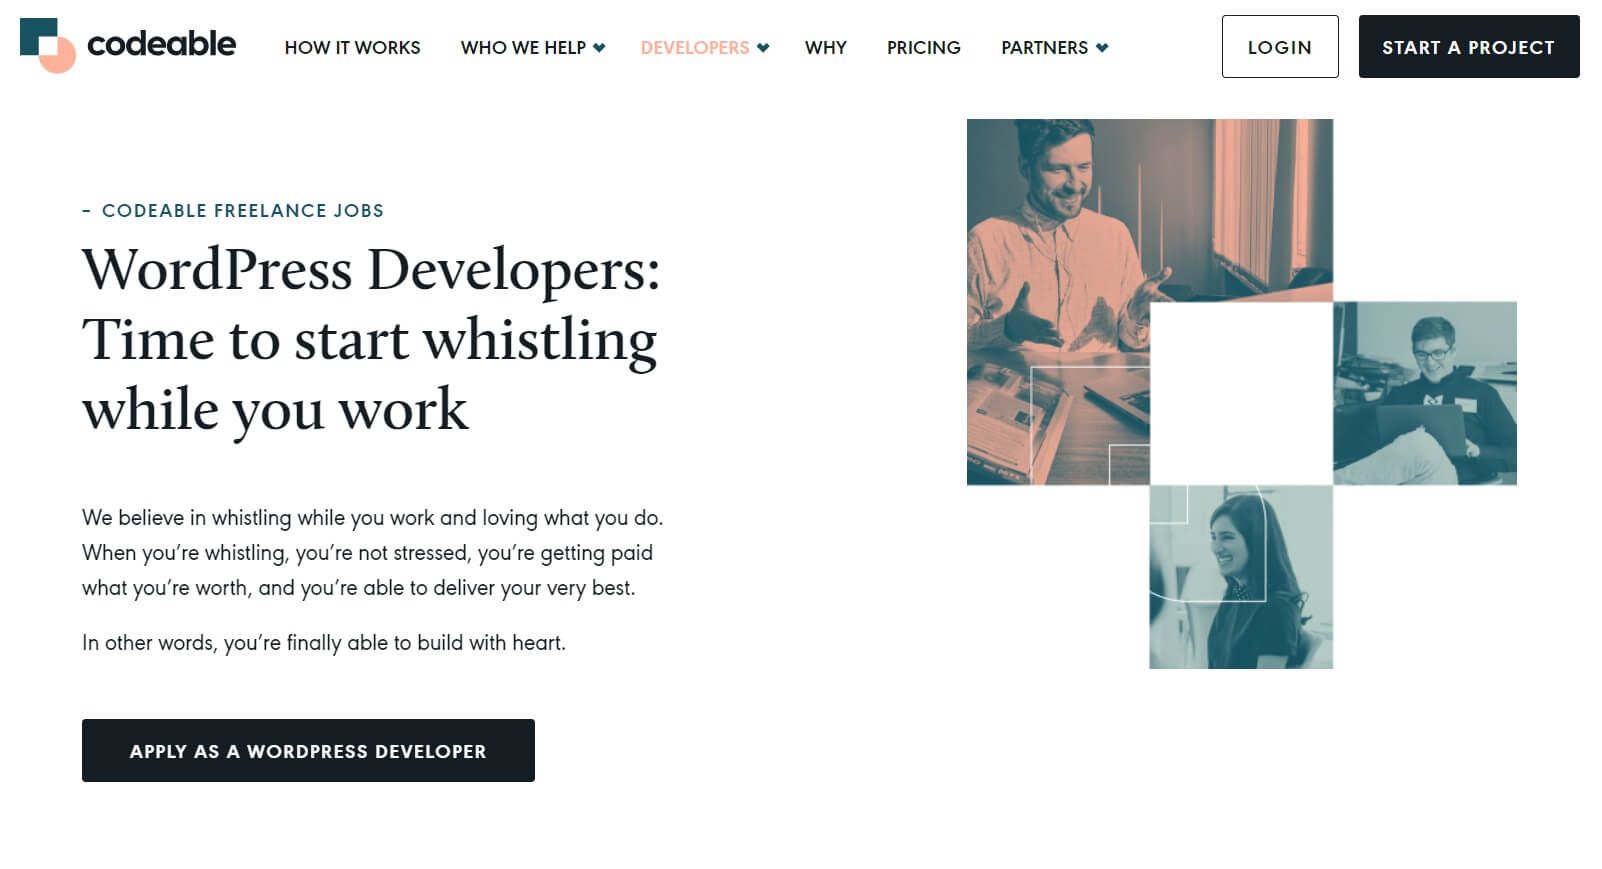 The Codeable developer page